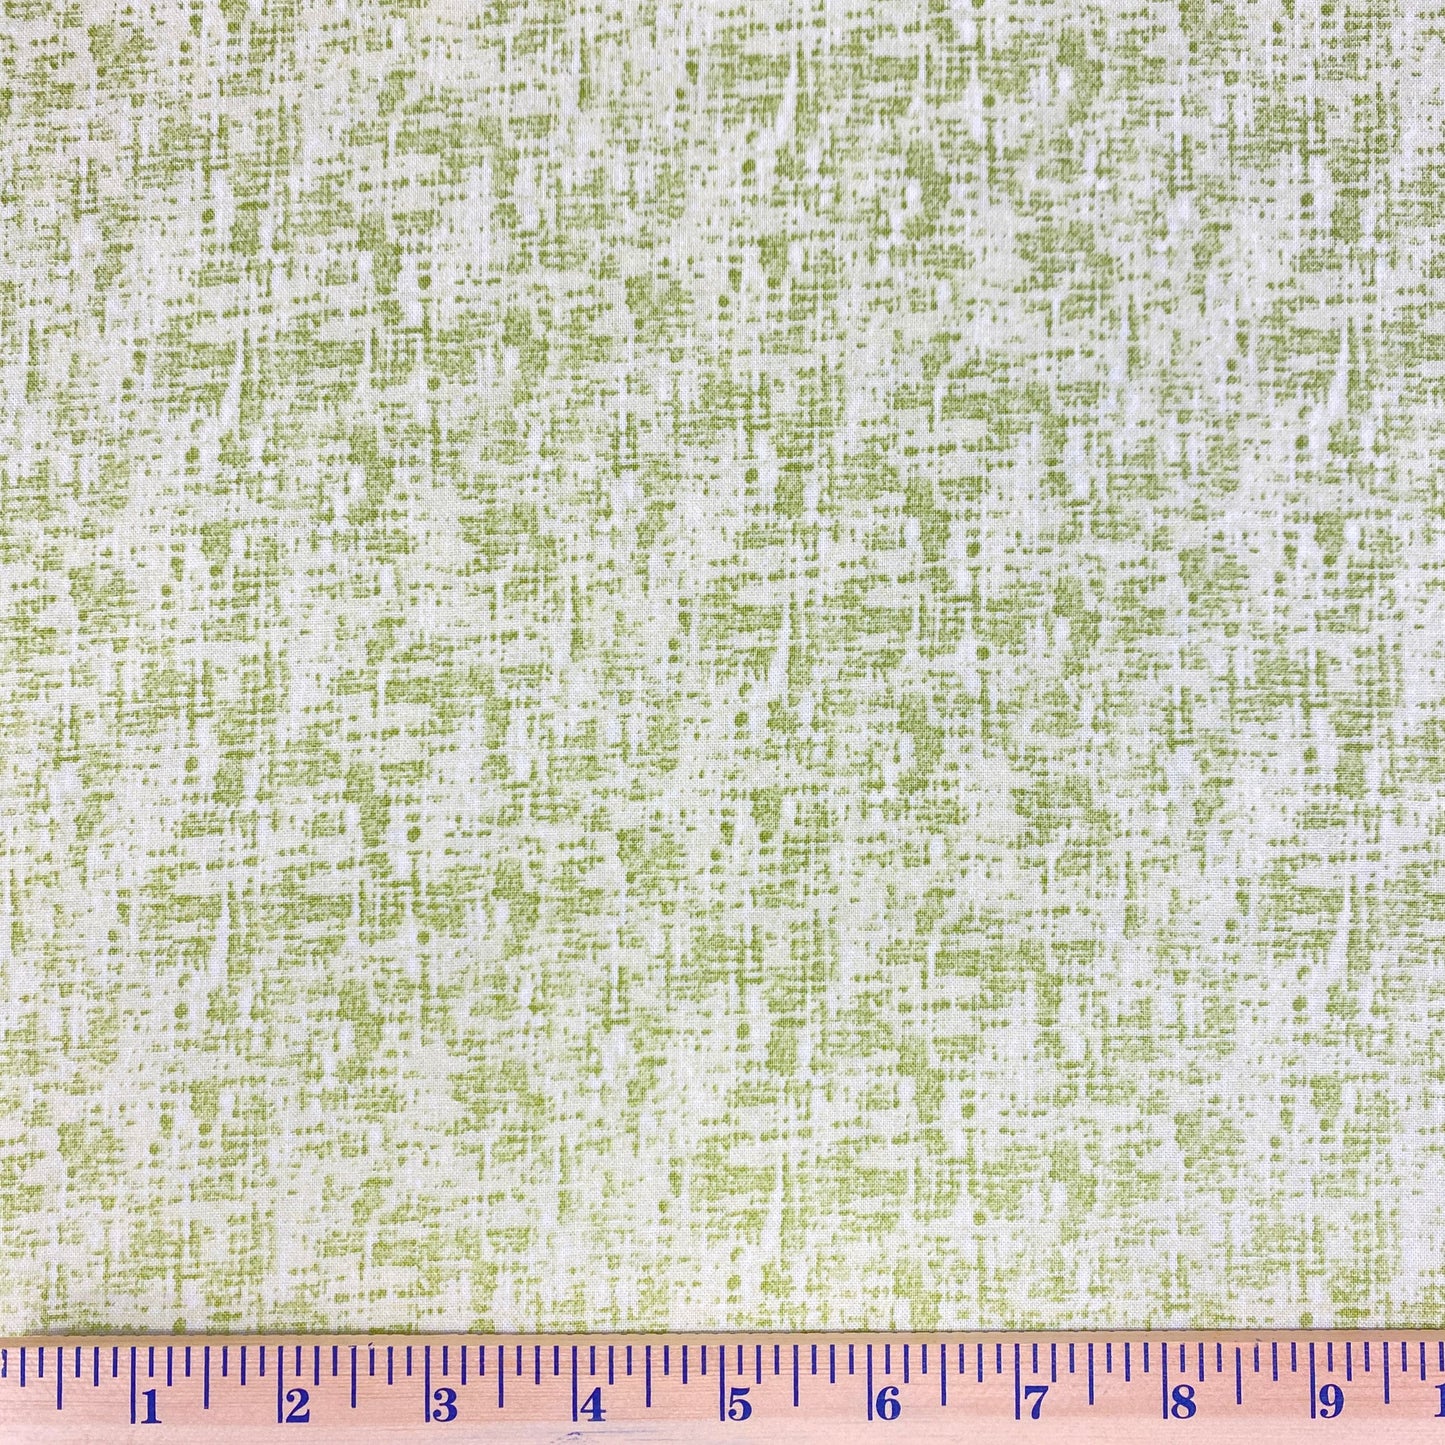 Grunge Plaid in Spring Green is from the Quilter's Cupboard collection designed by Karen Combs for Riverwood Fabrics. It features medium green cross-hatching in a grunge pattern, and is perfect for adding color without a bold or saturated print.